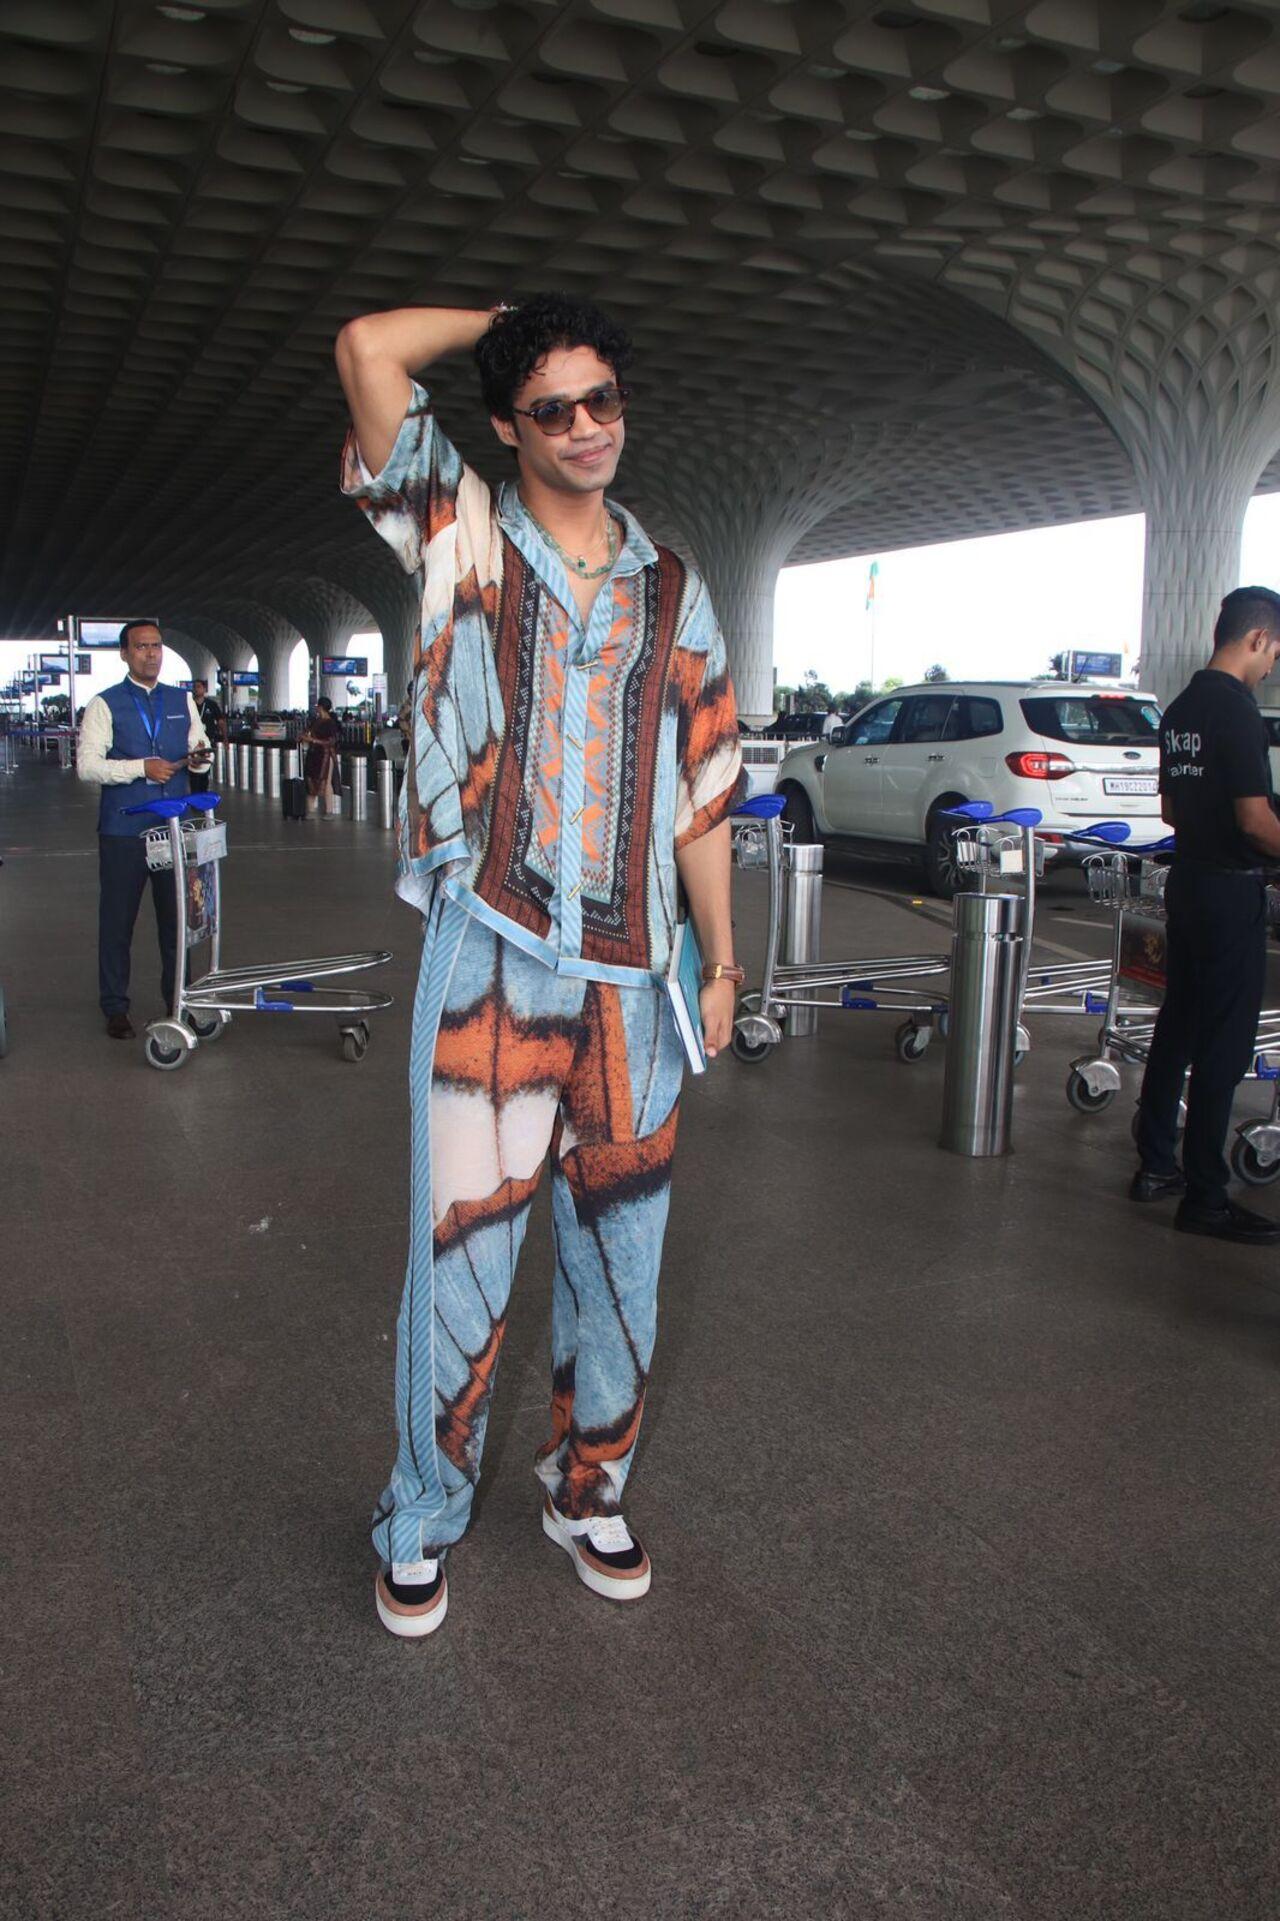 Babil Khan wore a funky outfit as he was spotted at the airport